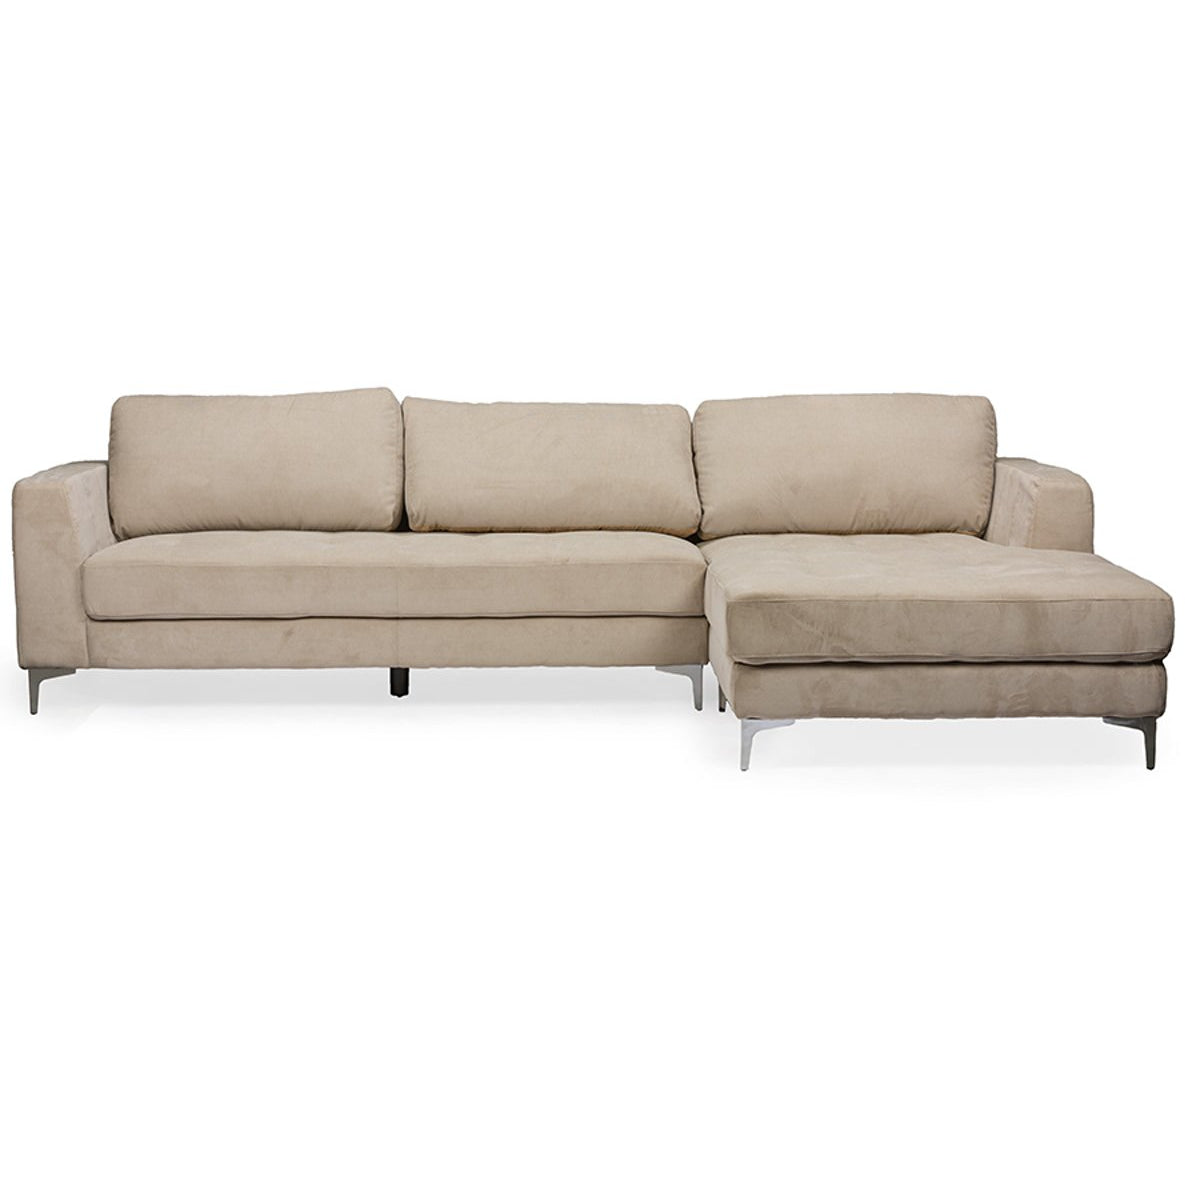 Baxton Studio Agnew Contemporary Light Beige Microfiber Right Facing Sectional Sofa Baxton Studio-sectionals-Minimal And Modern - 1